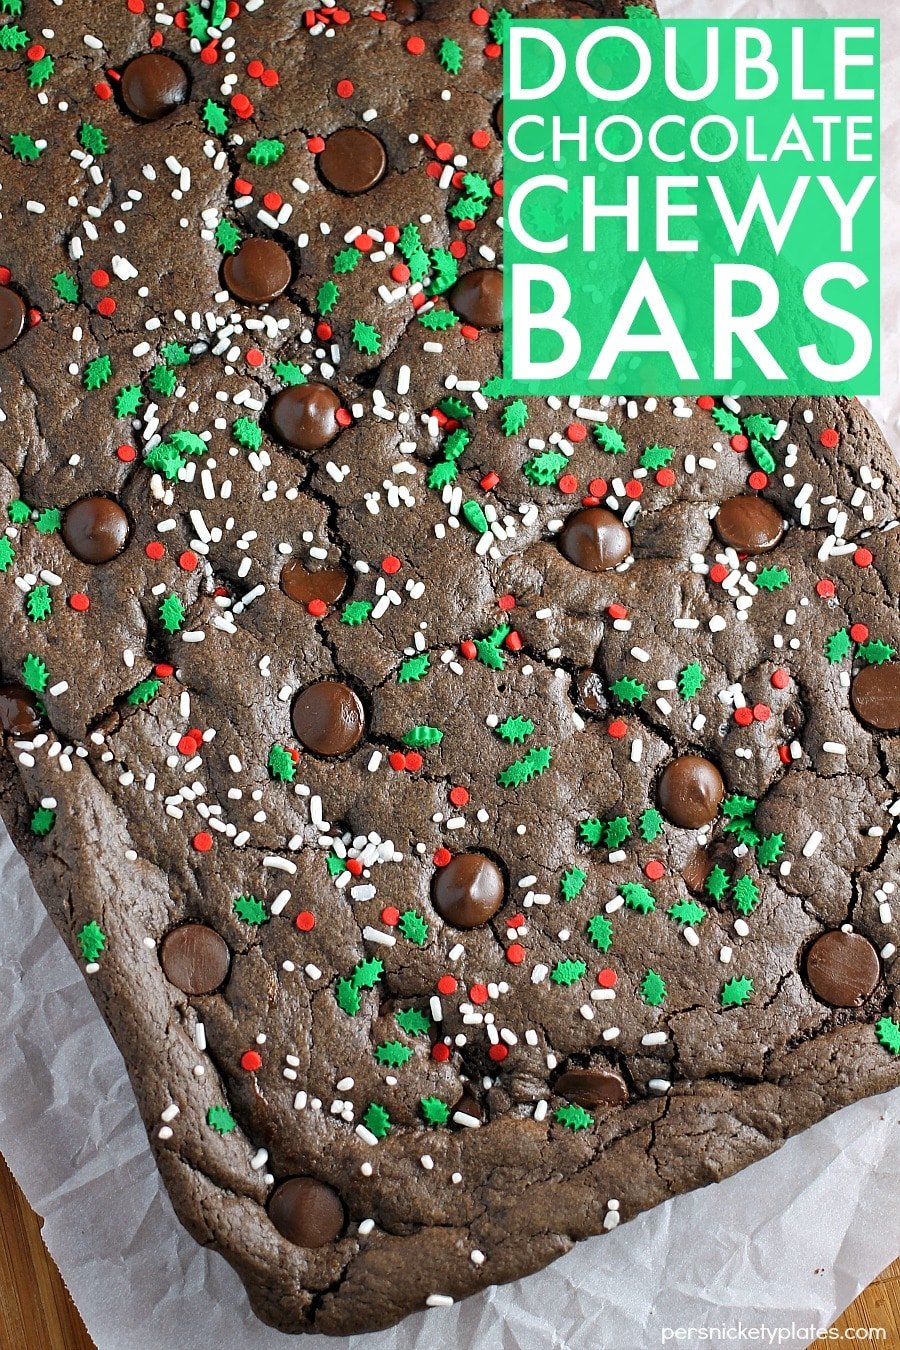 Double Chocolate Chewy Bars are semi-homemade and really simple - they start with a cake mix base and are dressed up with holiday sprinkles. Only five ingredients! | www.persnicketyplates.com